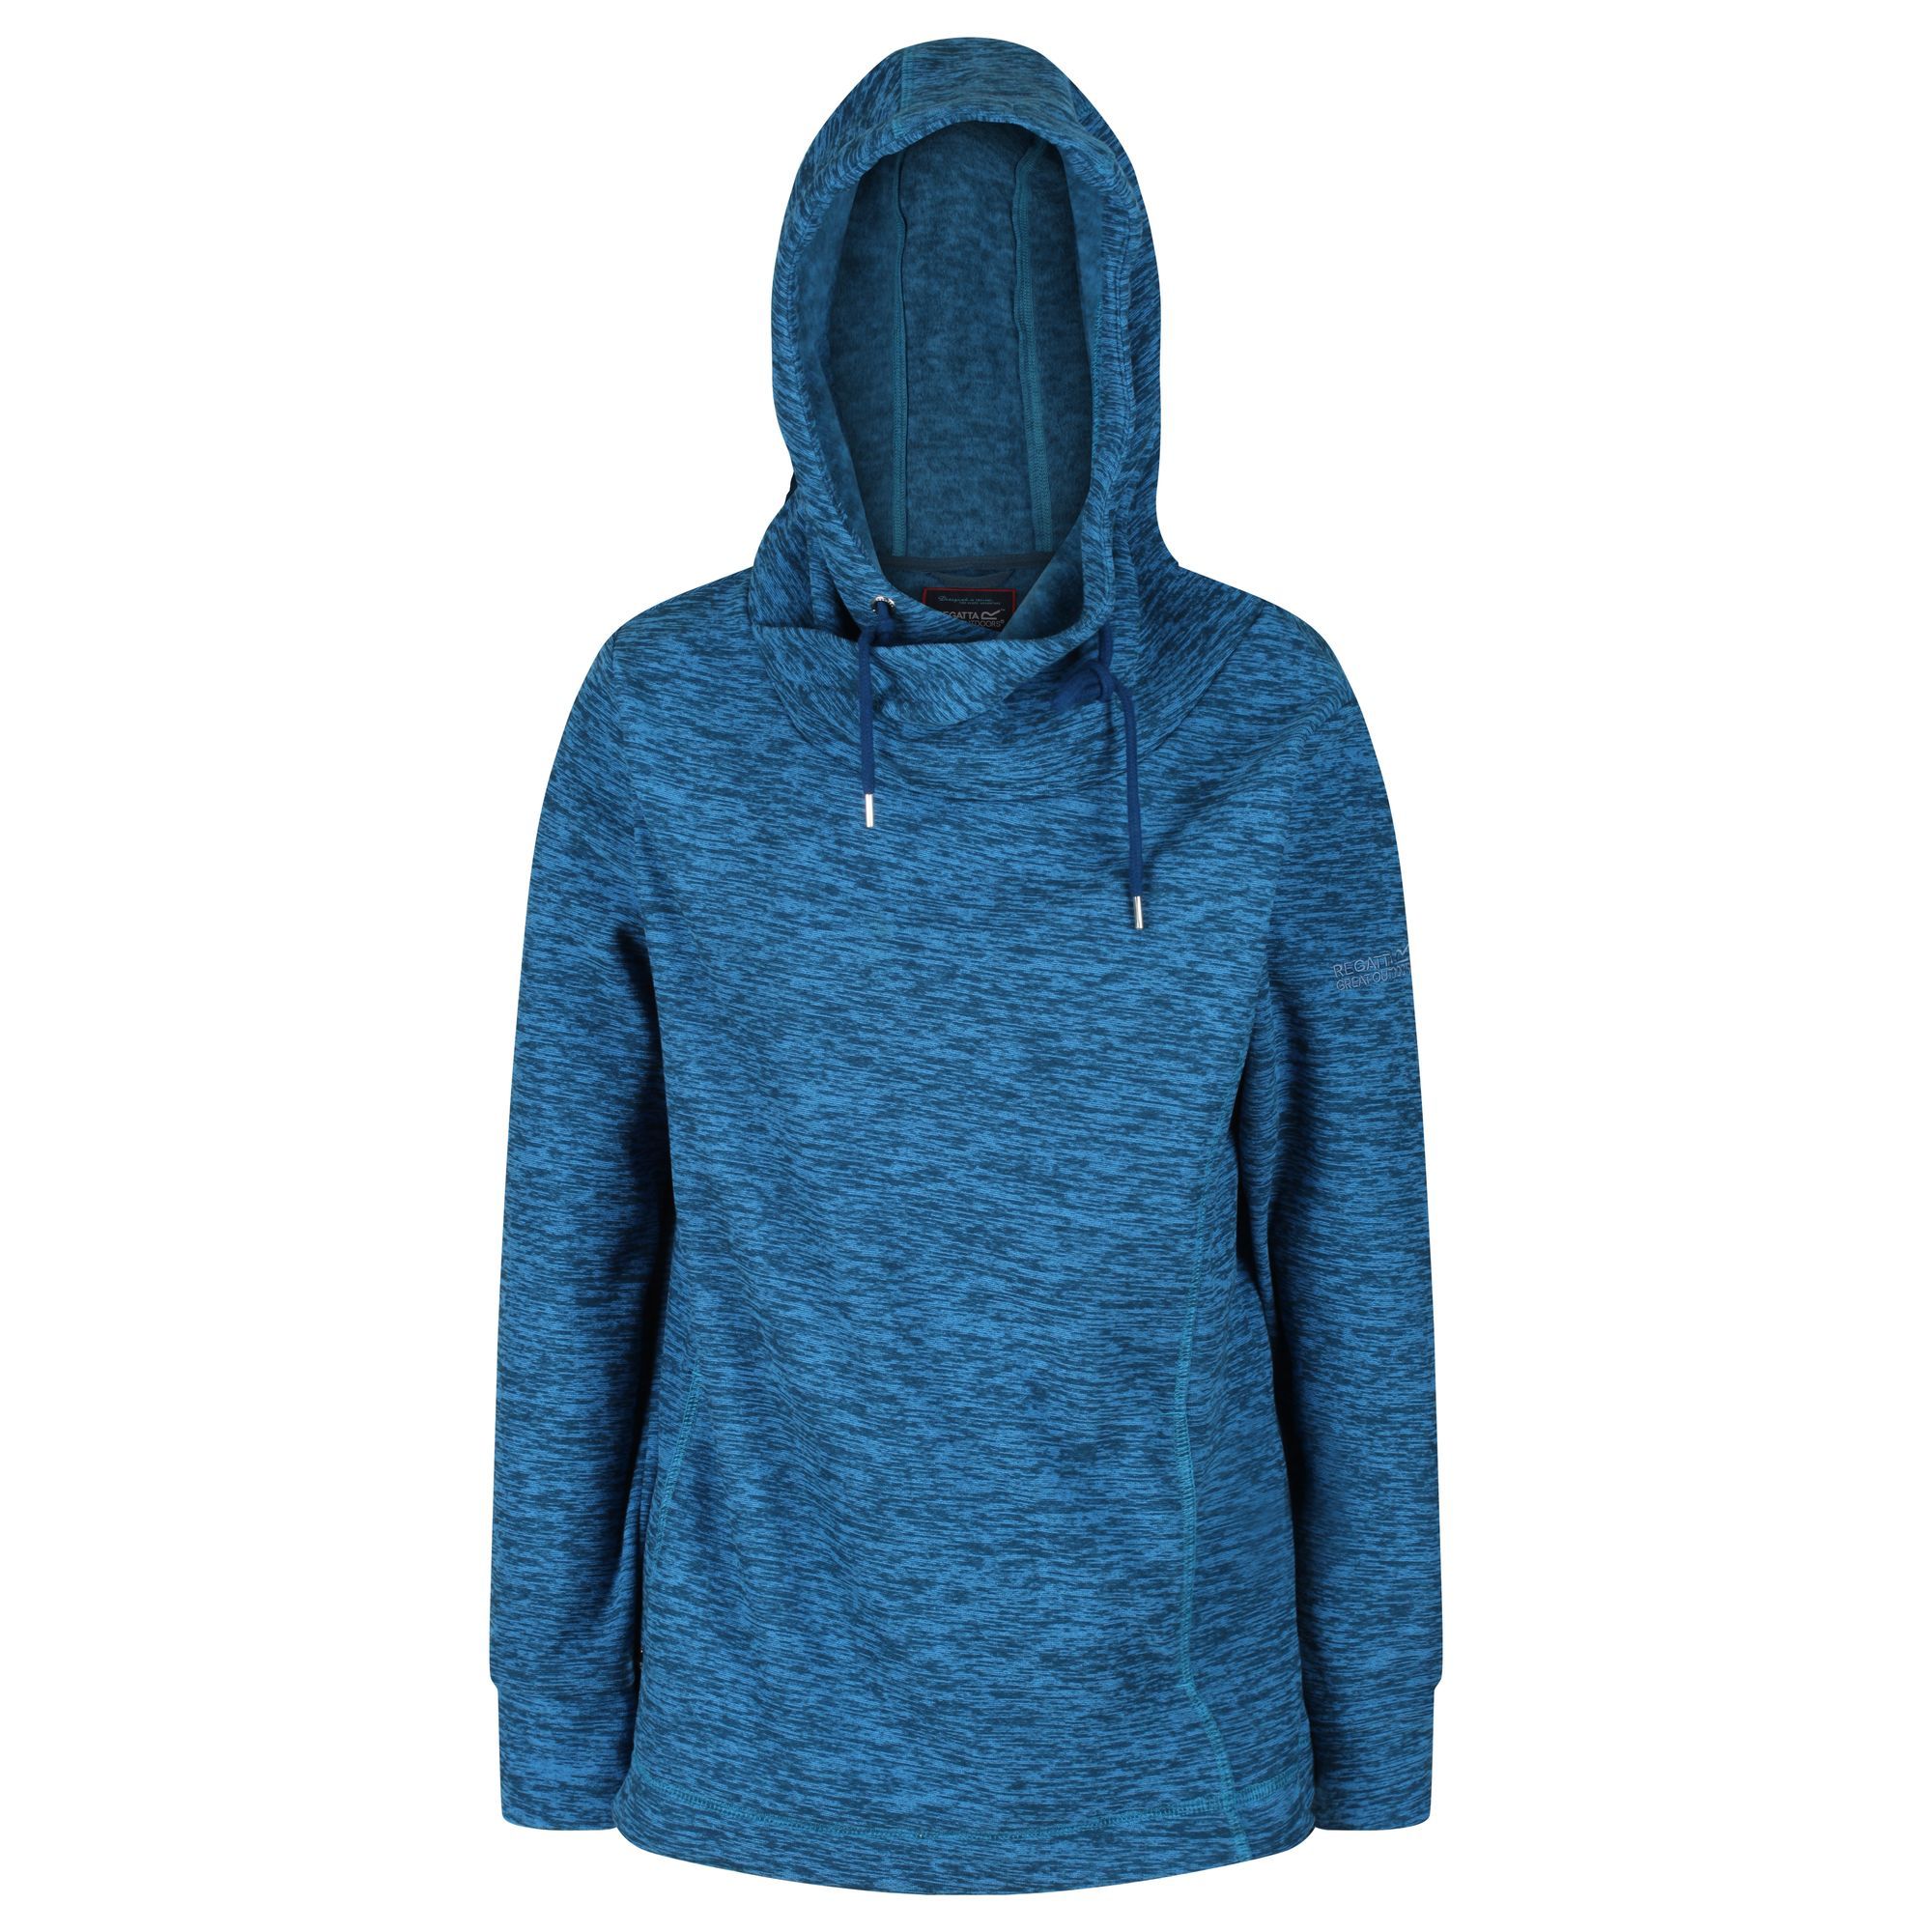 100% Polyester. Slouchy fleece sweater for weekend adventures. Made from soft touch fleece. Grown on hood with wrap around cowl neck construction. 2 lower pockets. 240Gsm.